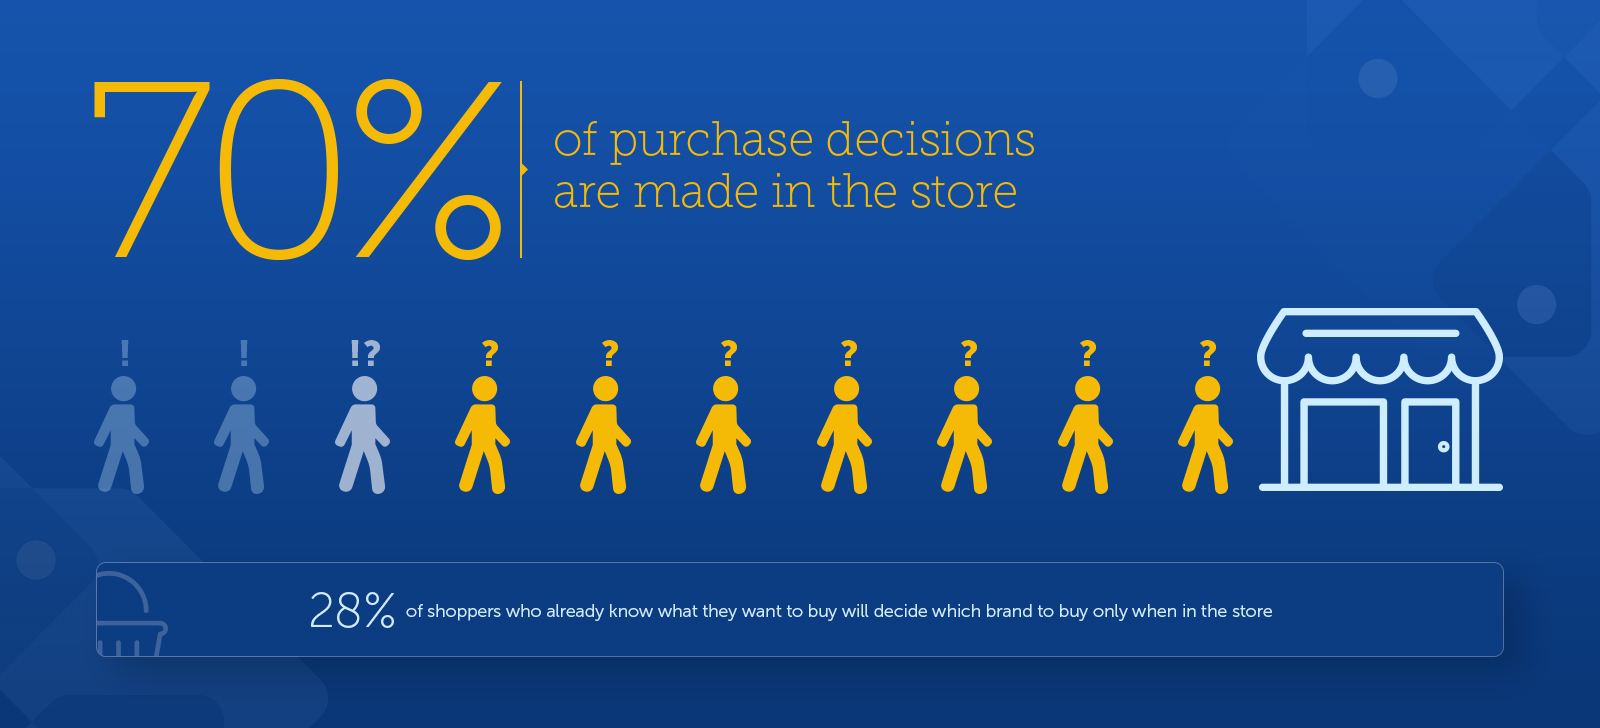 70% of purchase decisions are made in the store